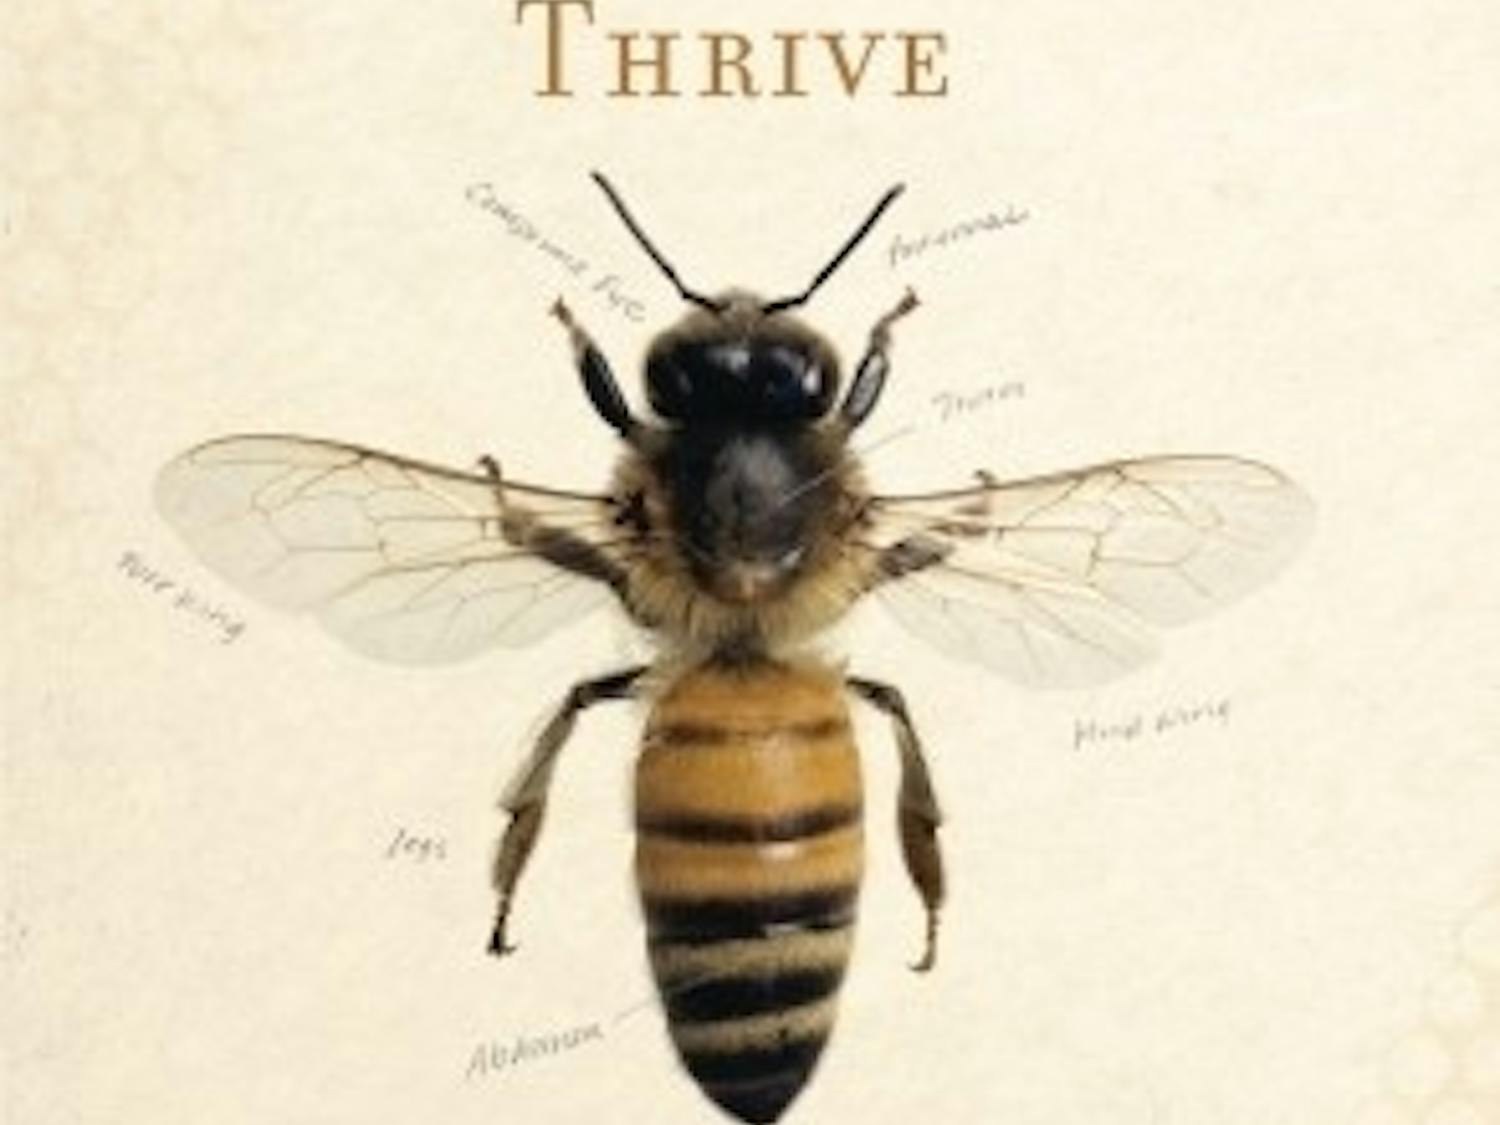 Swan defends the honeybee’s legitimacy against public indifference in her&nbsp;powerful new book.